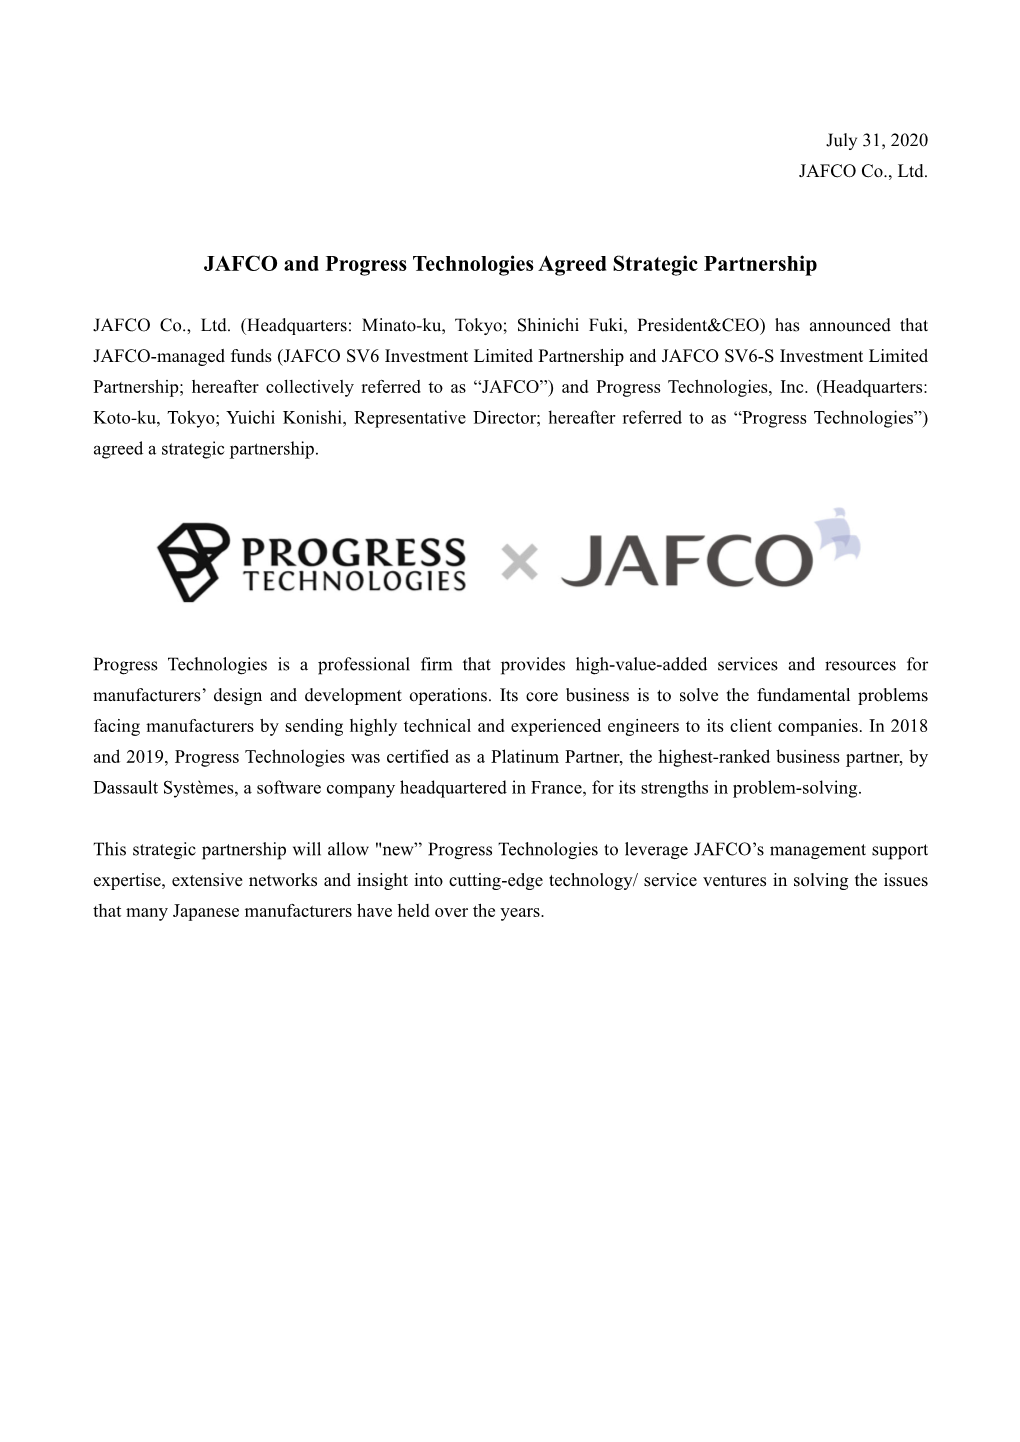 Jul 31, 2020 News Investment JAFCO and Progress Technologies Agreed